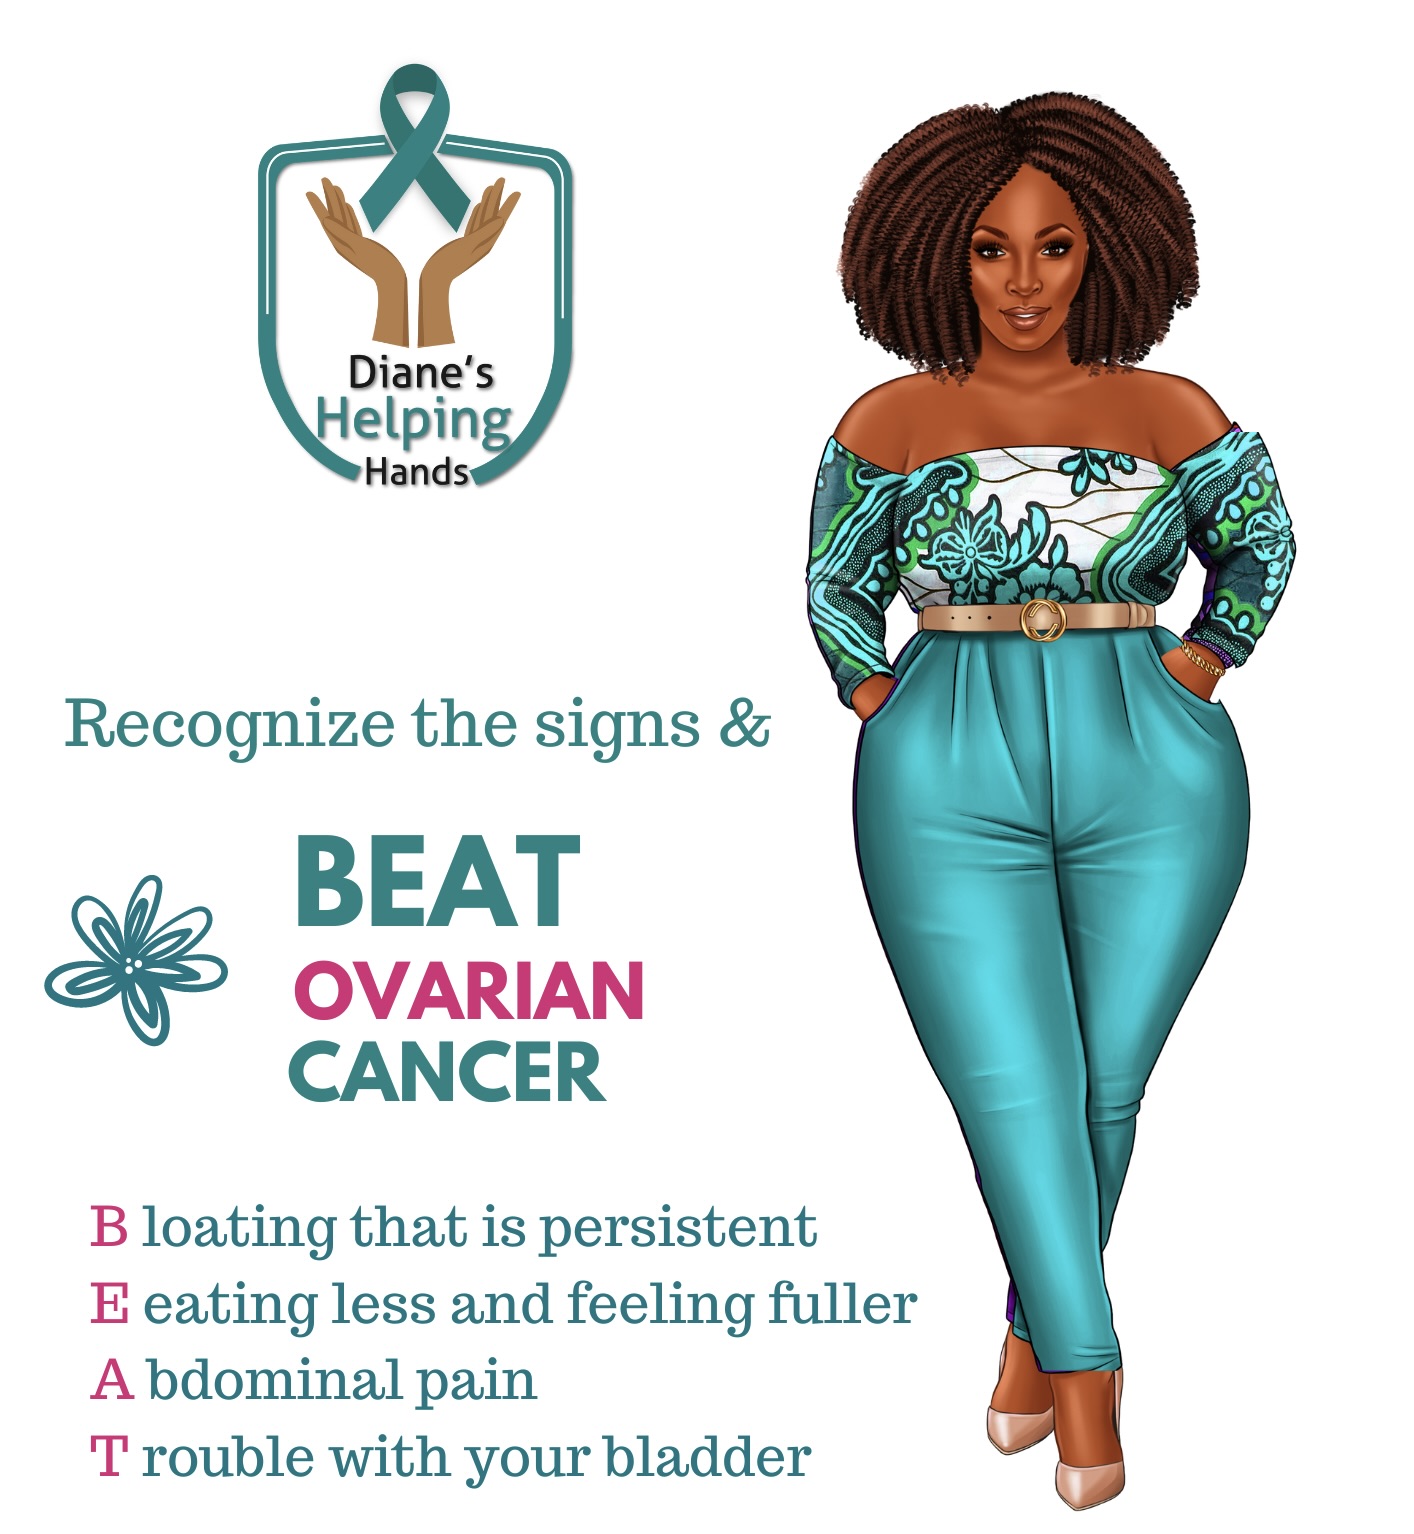 Beat ovarian cancer signs include Bloating that is persistent, eating less and feeling fuller, abdominal pain, trouble with your bladder